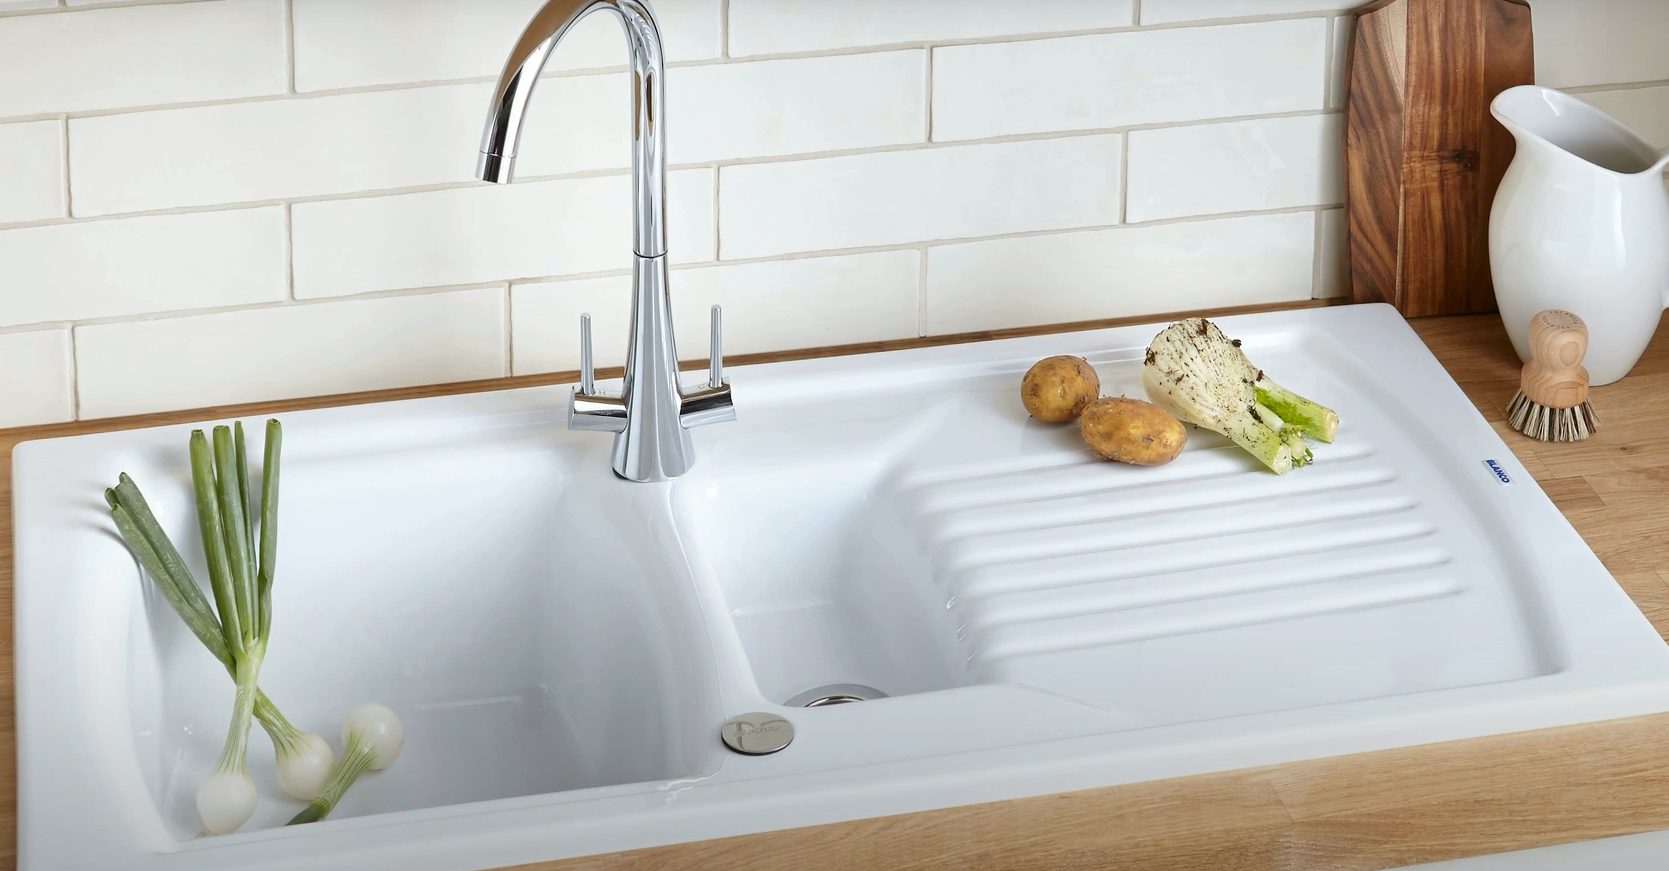 one sink can be used to wash vegetables